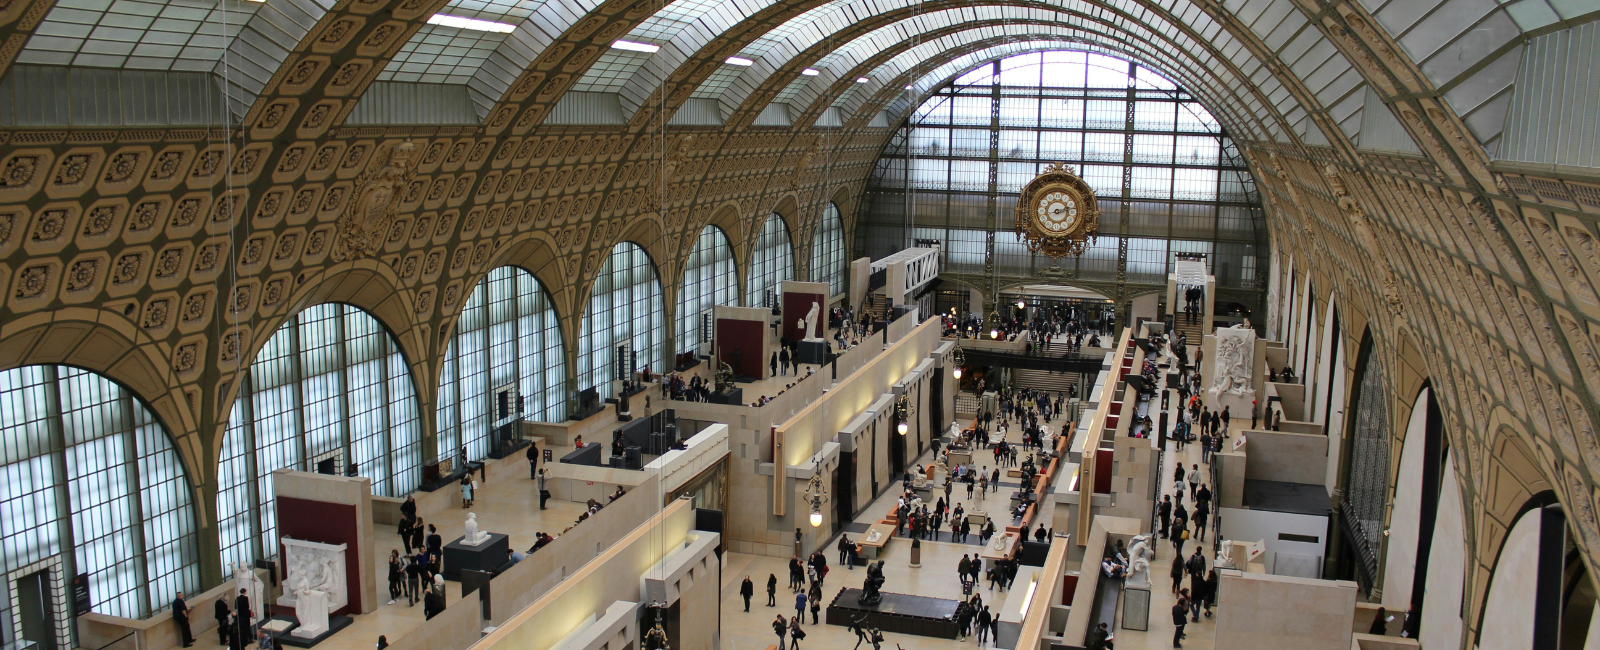 Main room inside Musee D'Orsay